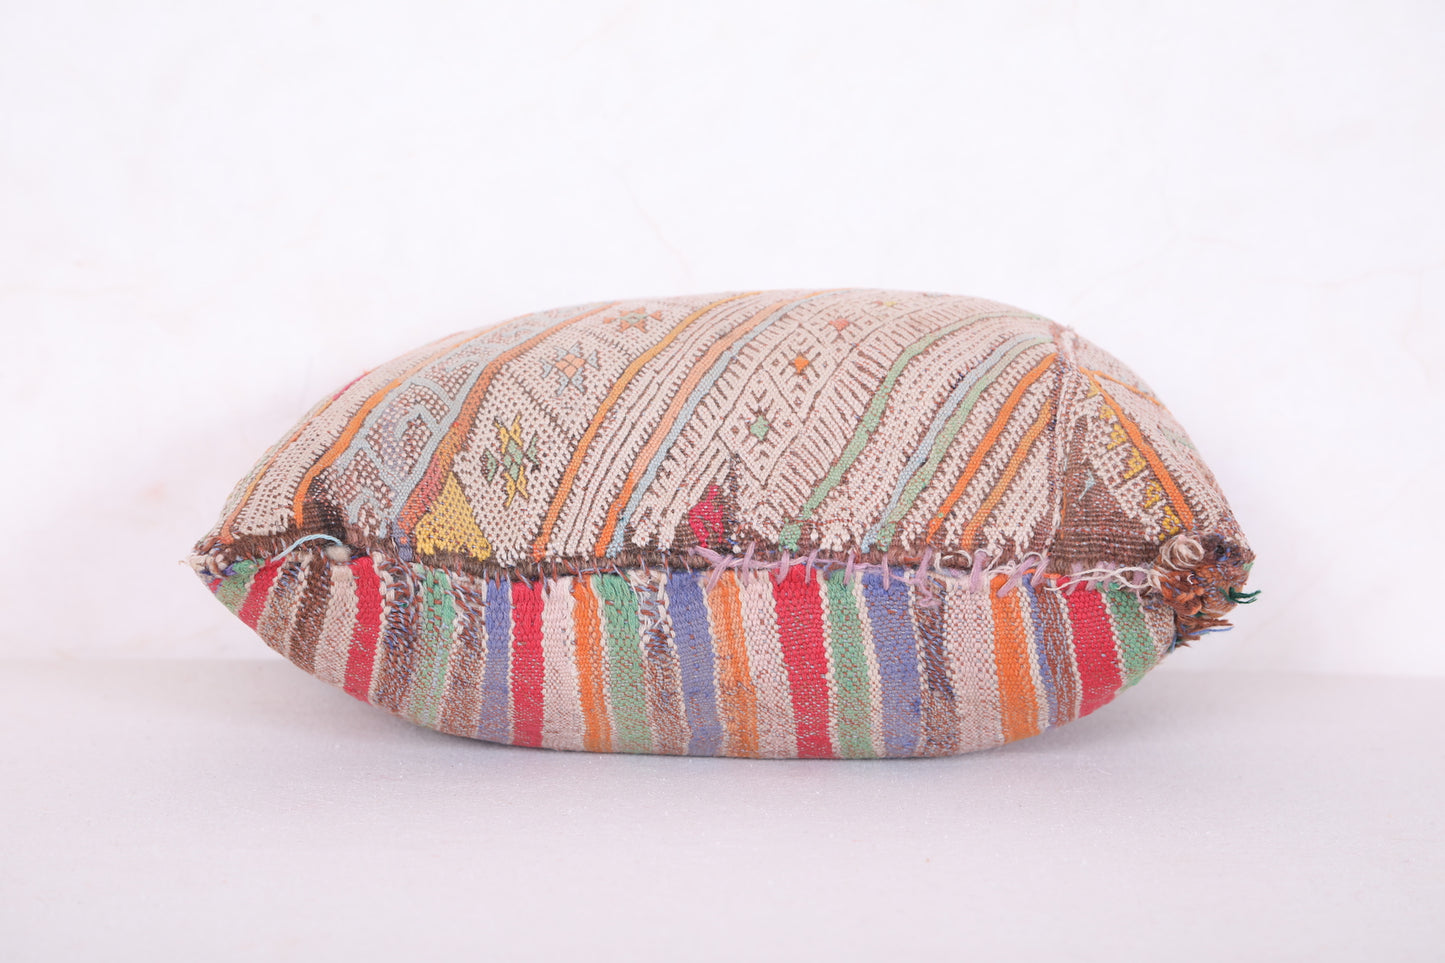 Vintage Pillow 13.3 INCHES X 16.1 INCHES